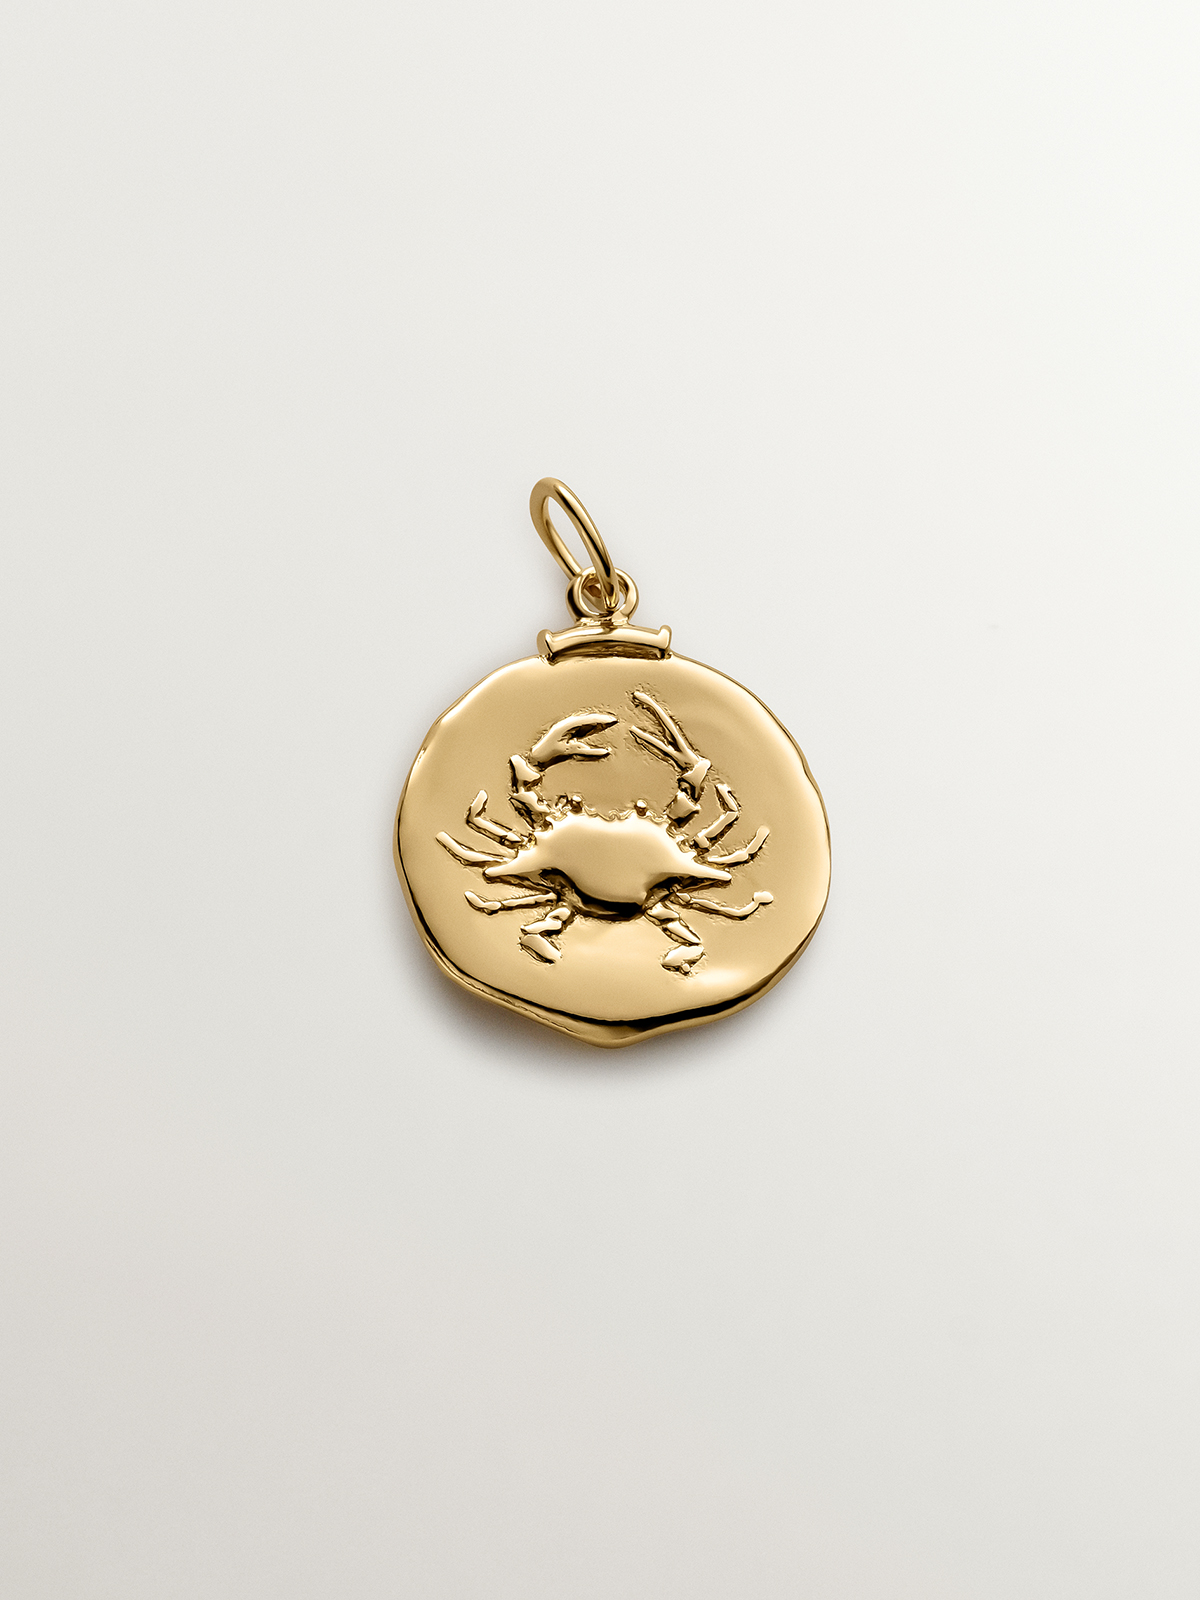 925 Silver Cancer Charm Plated in 18K Yellow Gold